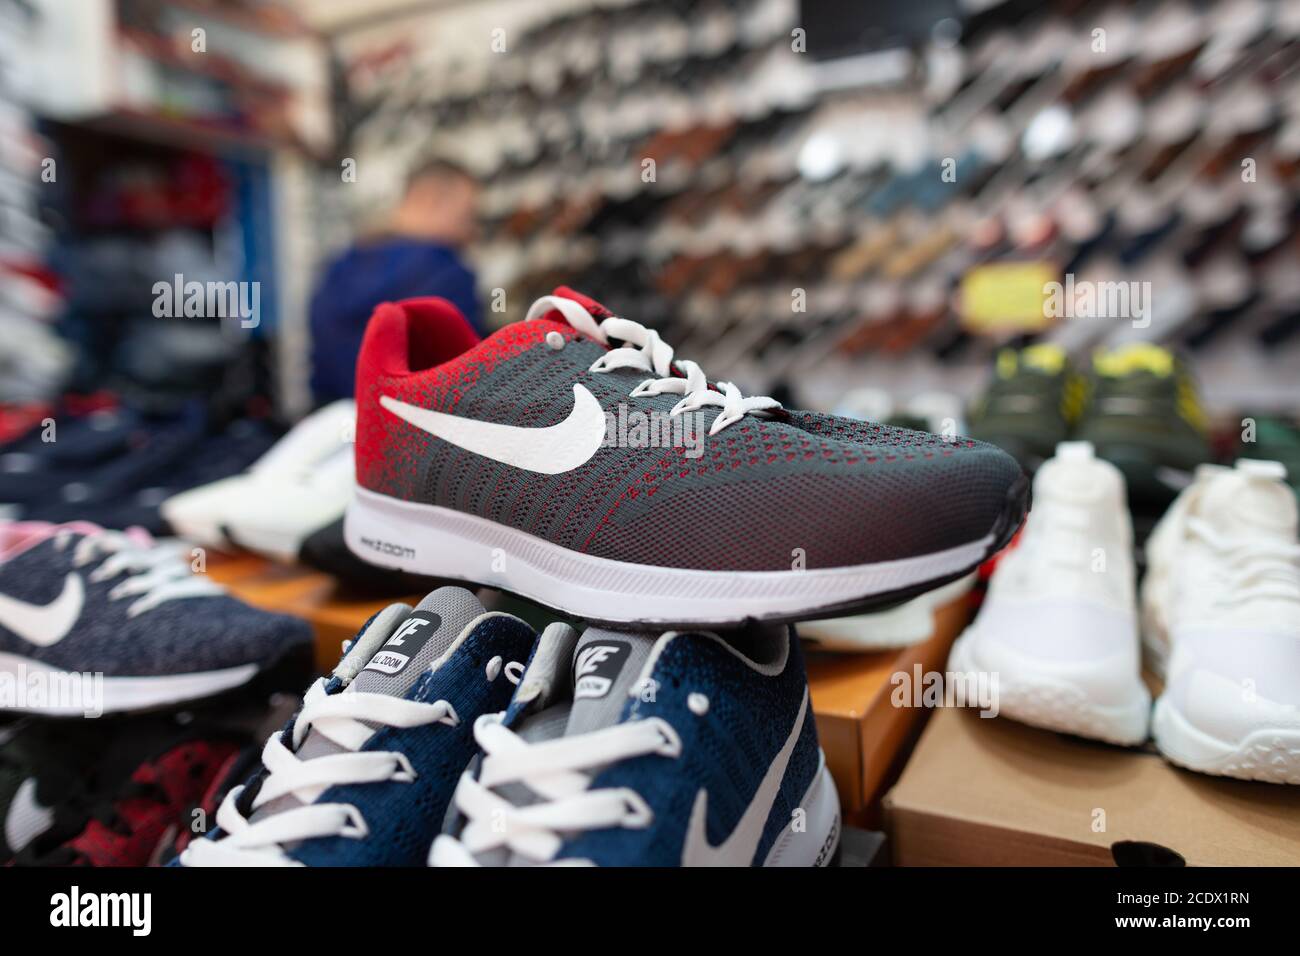 ANTALYA / TURKEY - January 19, 2020: Shoes of various brands stands in a  shoe market shop Stock Photo - Alamy